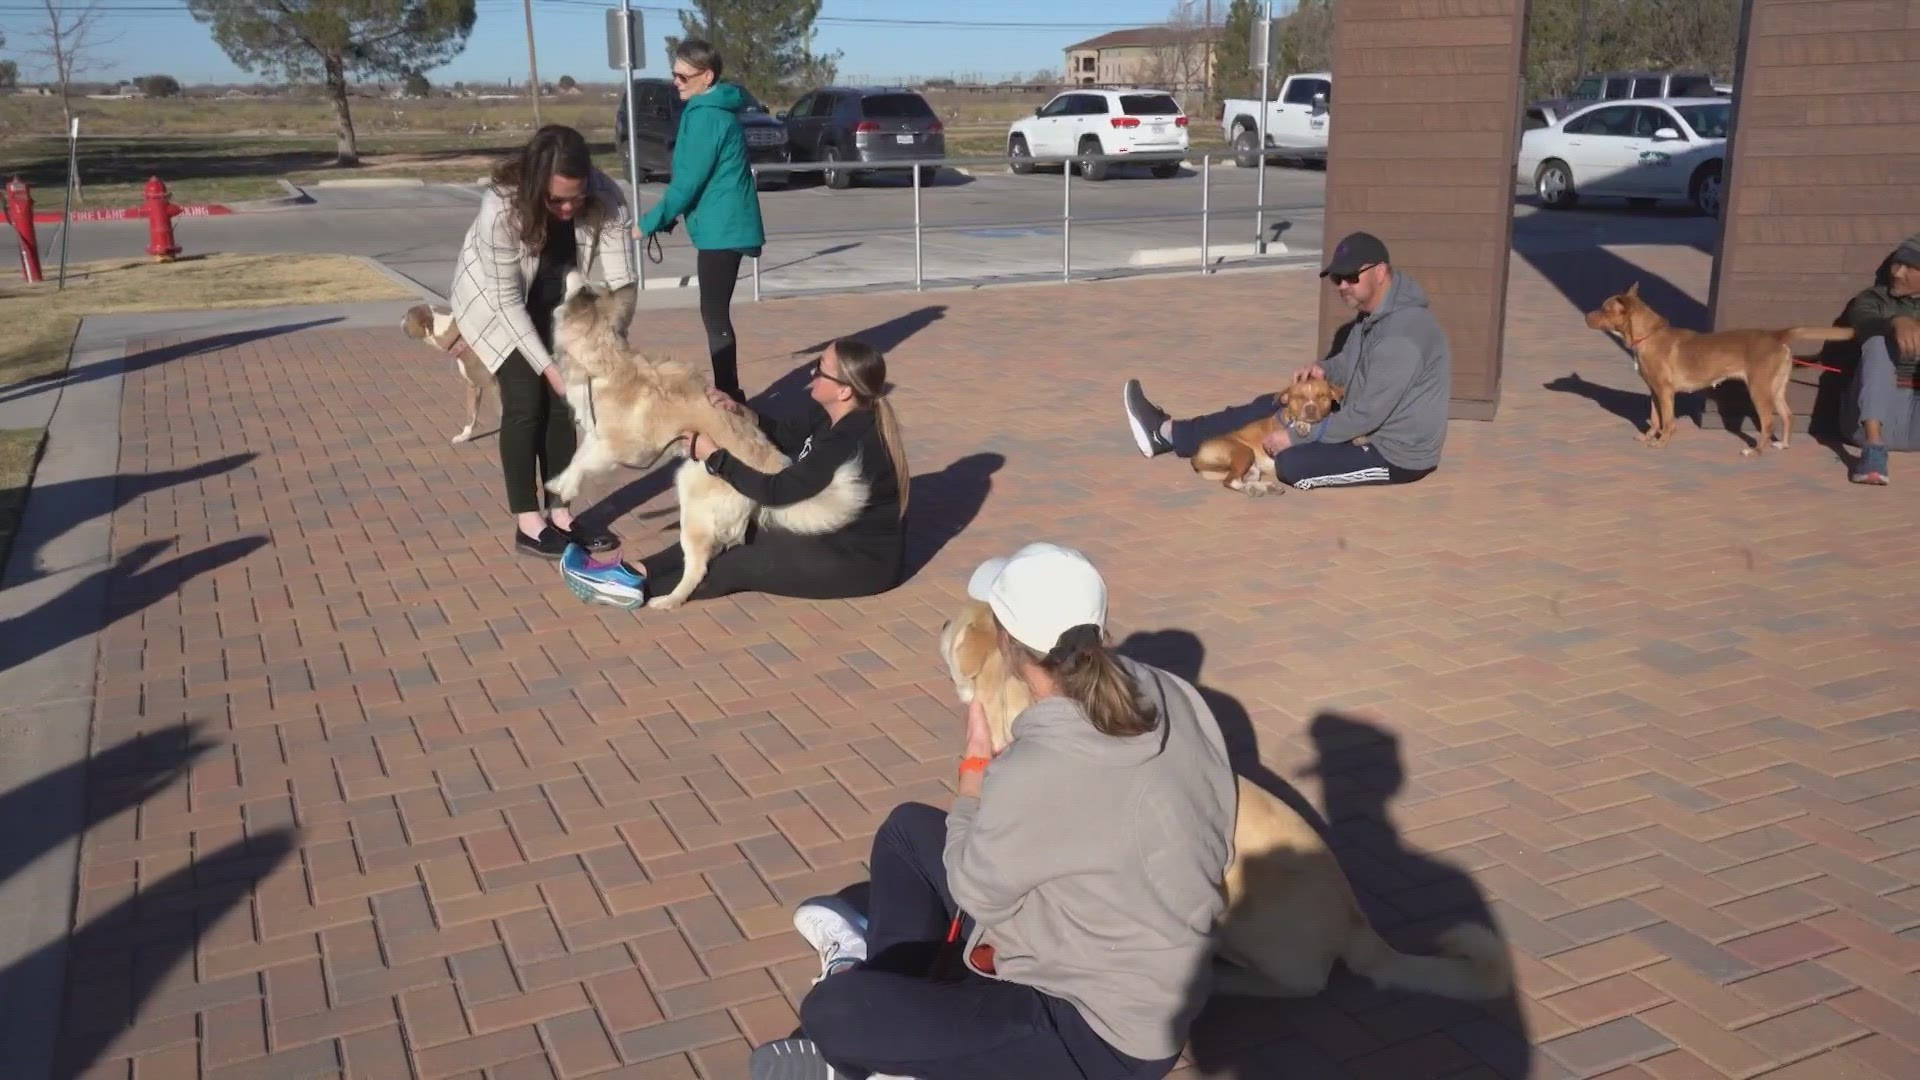 Rescue Runners is designed to recruit people to help walk or run shelter dogs.